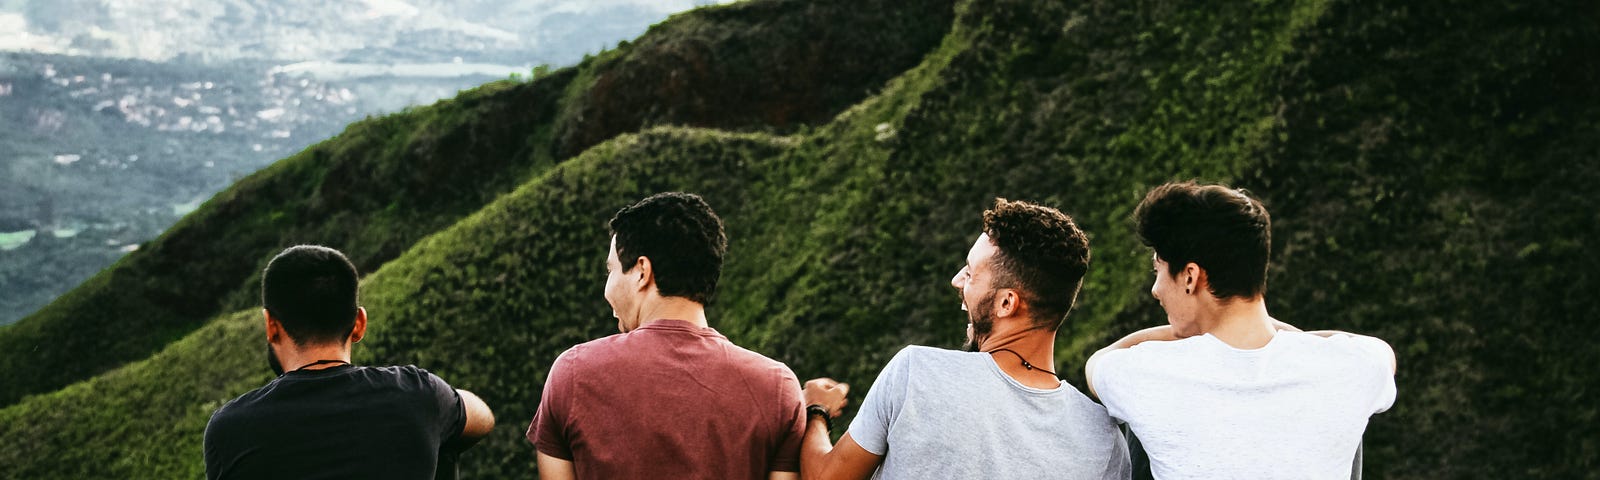 male friends sitting together and laughing on a rock — deep friendships that can change your life